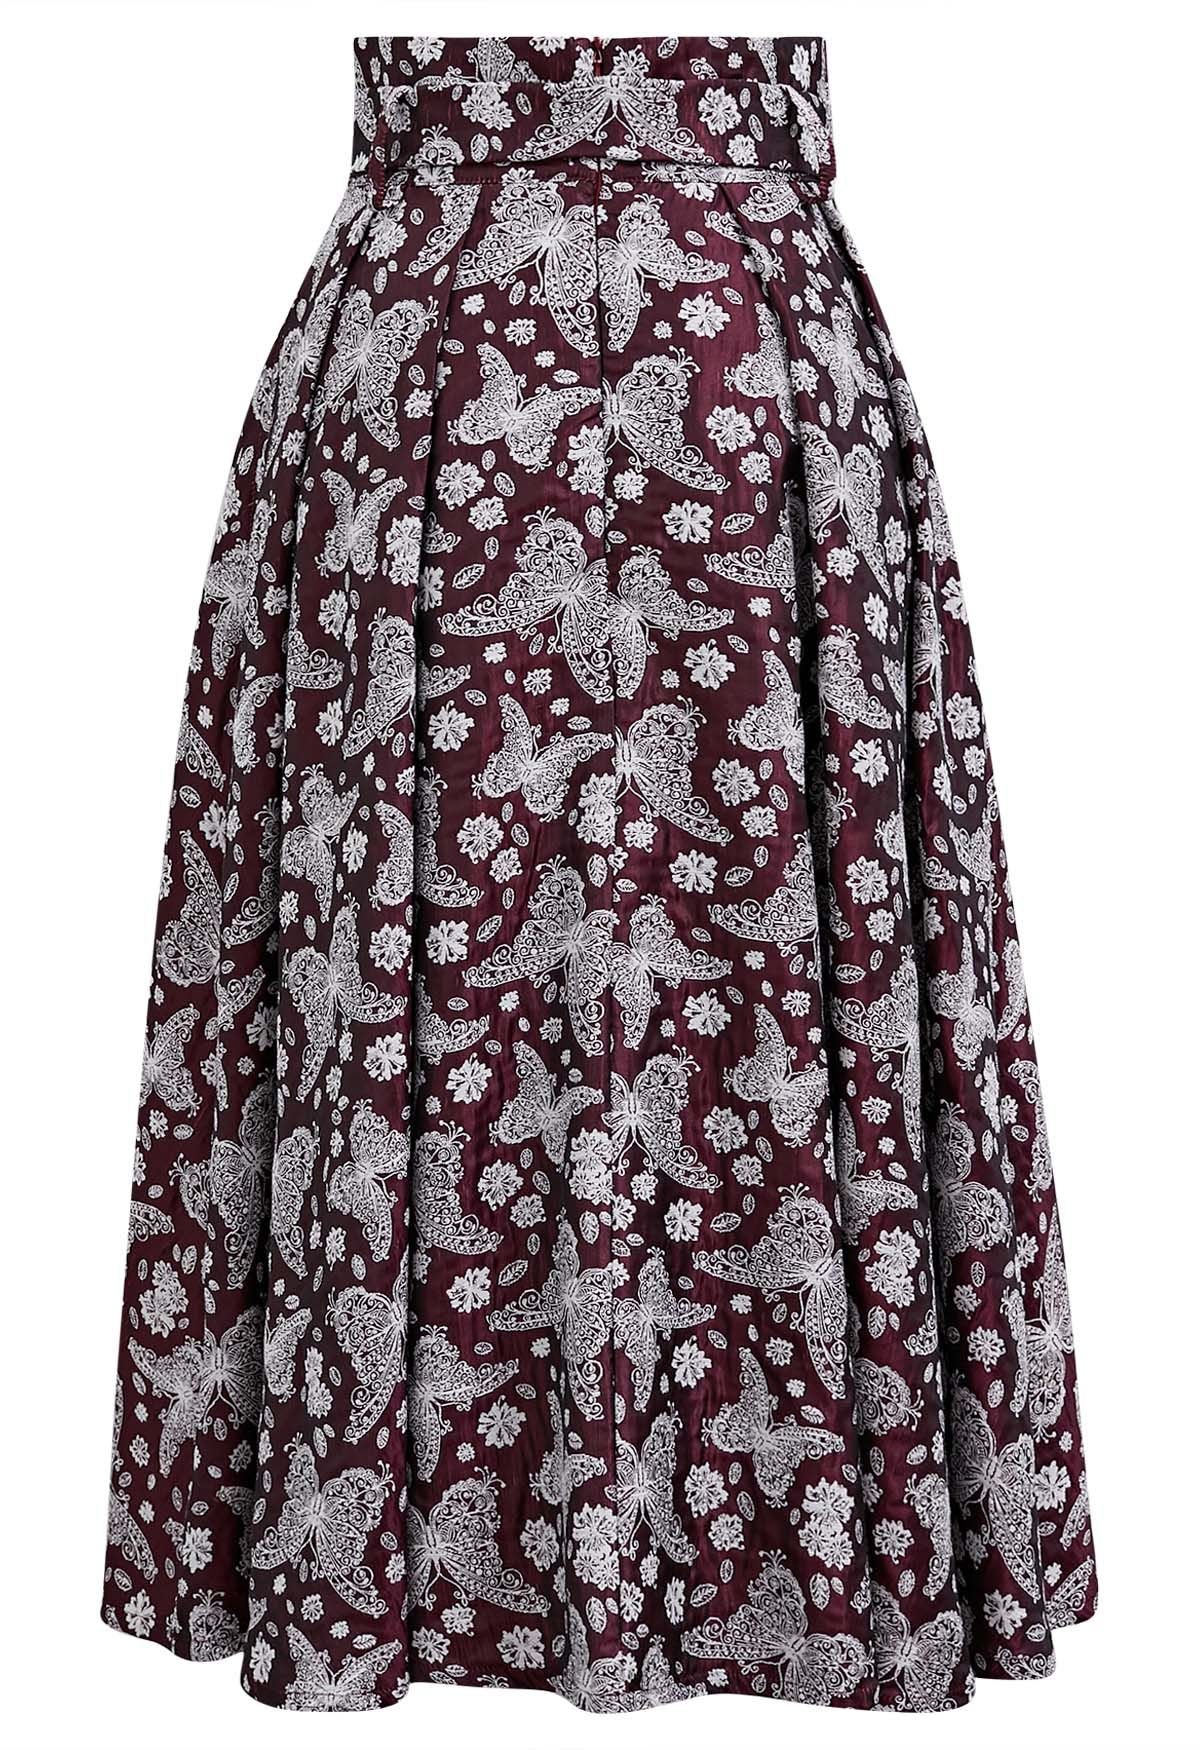 Whimsical Butterfly Belted A-Line Midi Skirt in Burgundy - Retro, Indie ...